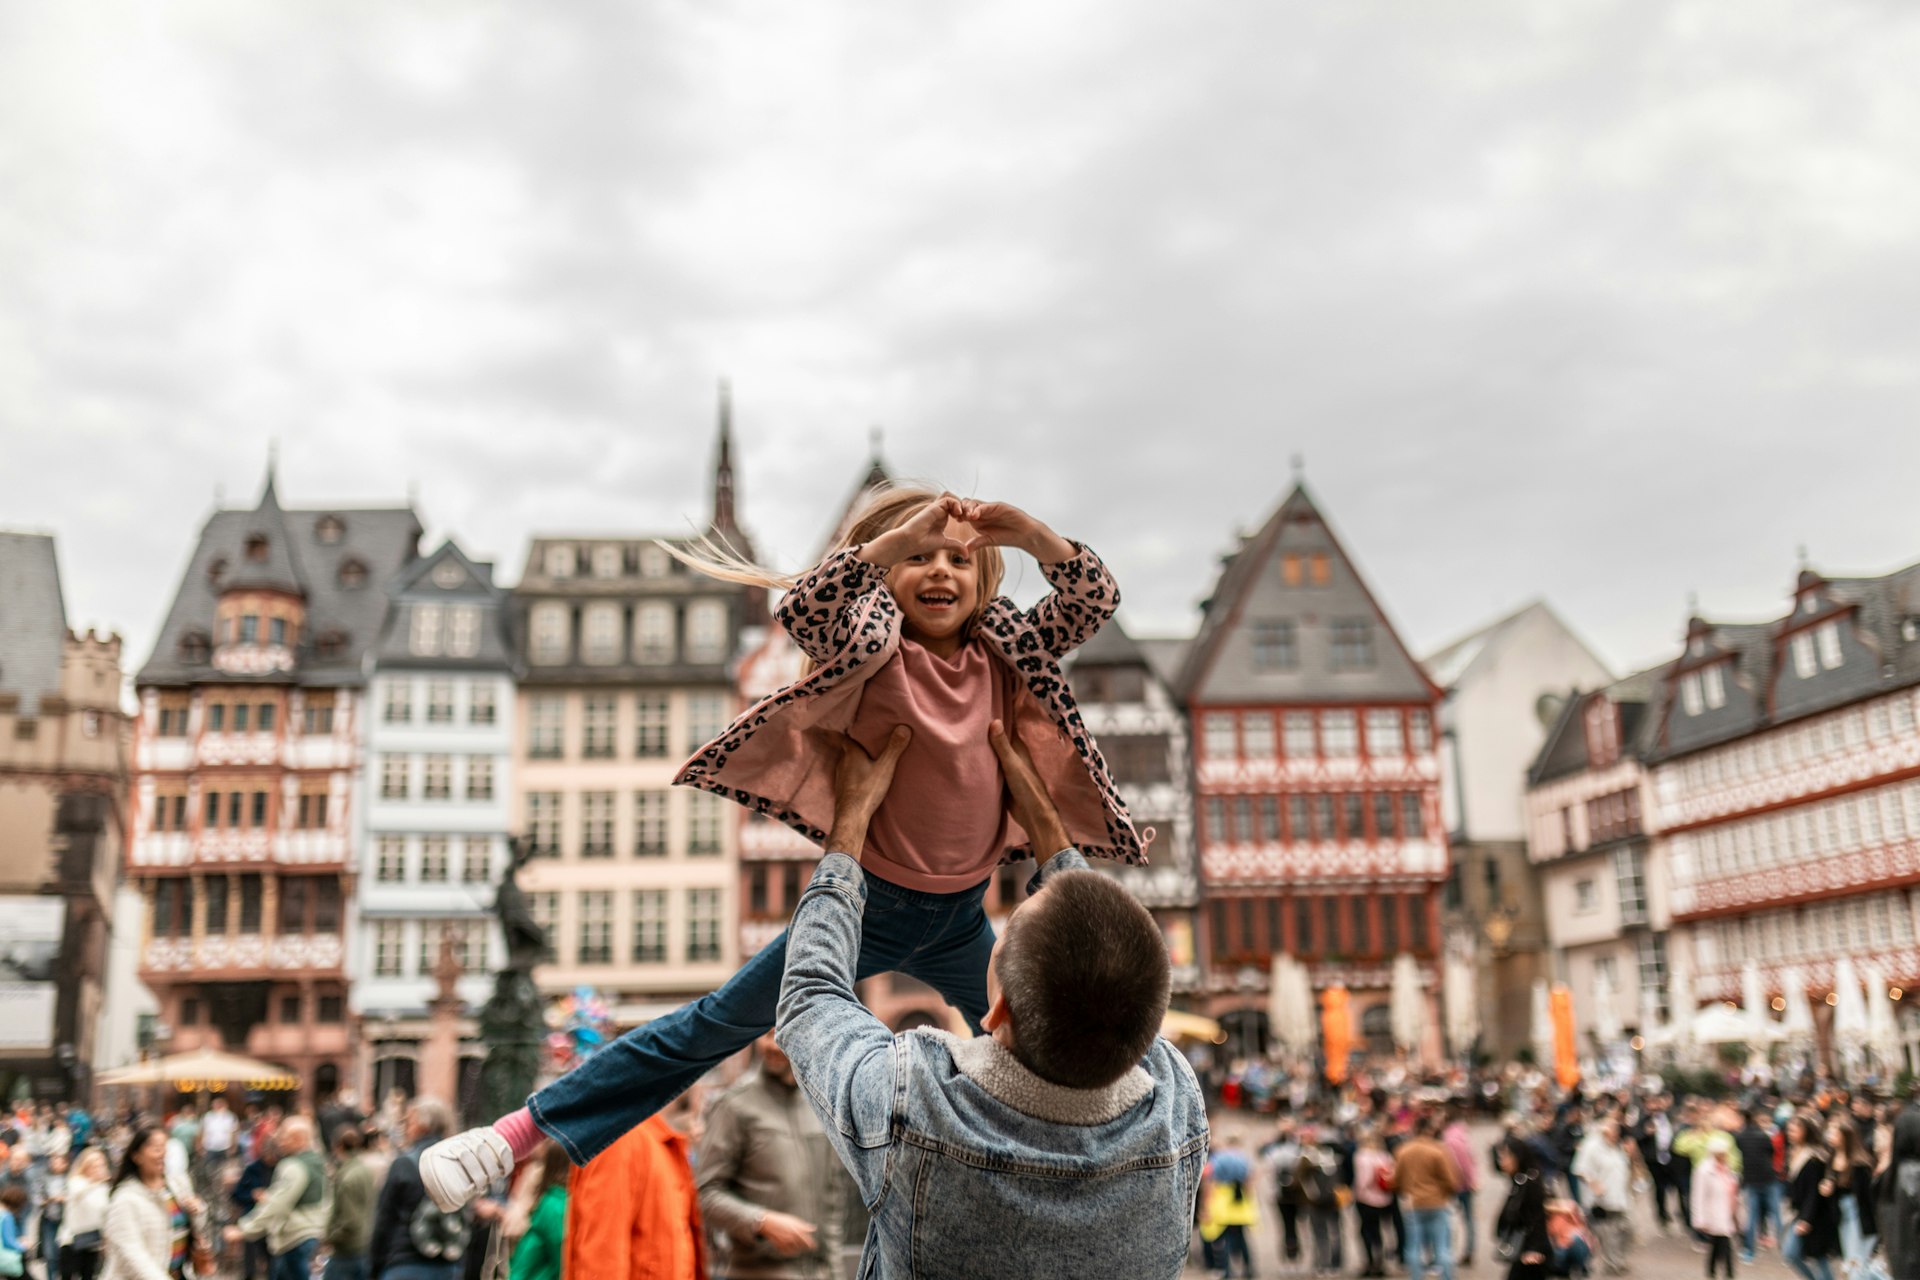 A father throws his daughter in the air in a town lined with half-timbered houses